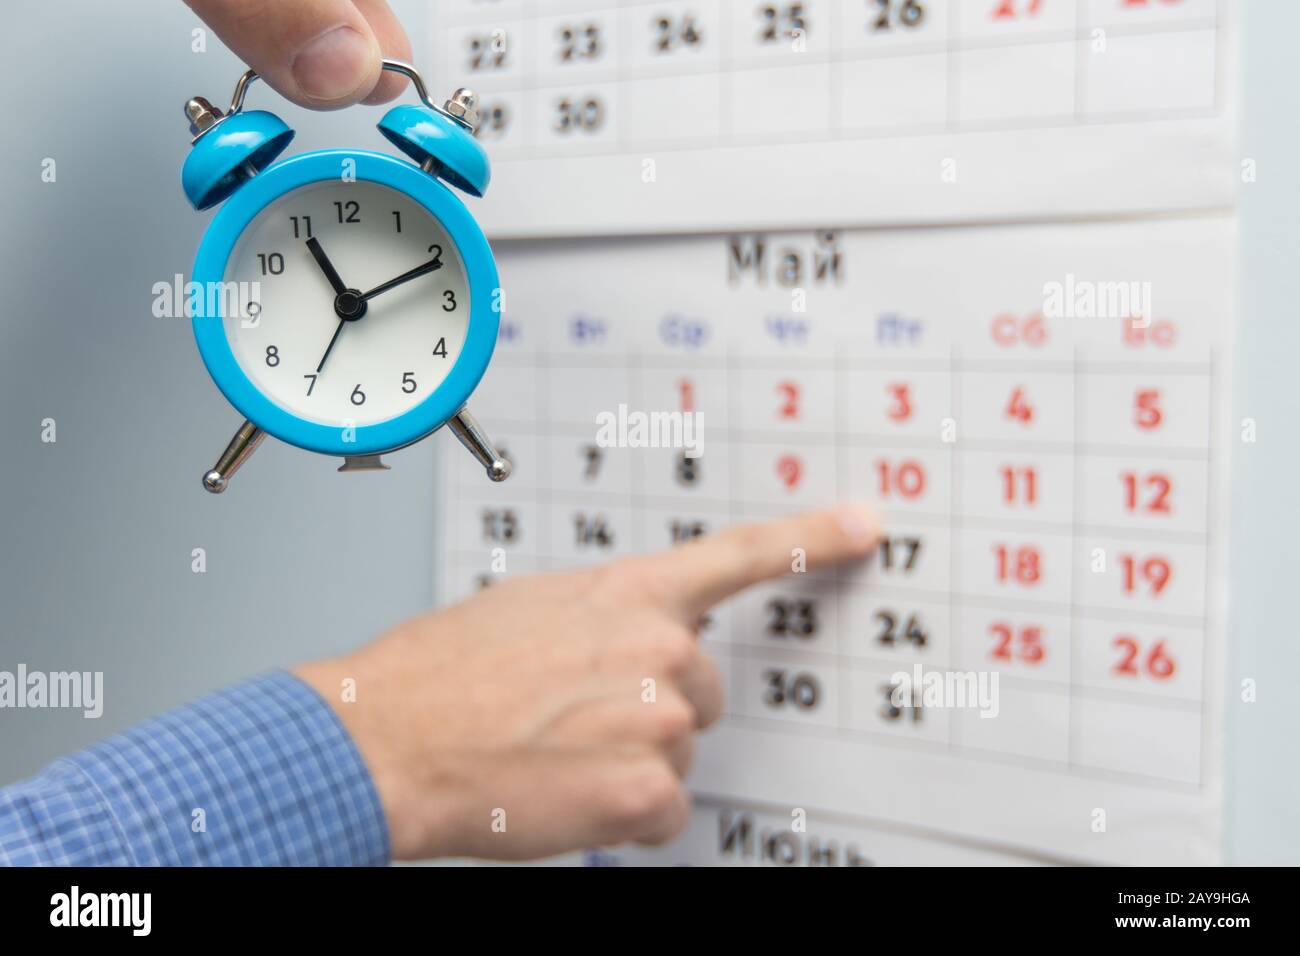 A hand holds a small alarm clock, in the background a hand points to long weekends and holidays on a wall calendar Stock Photo